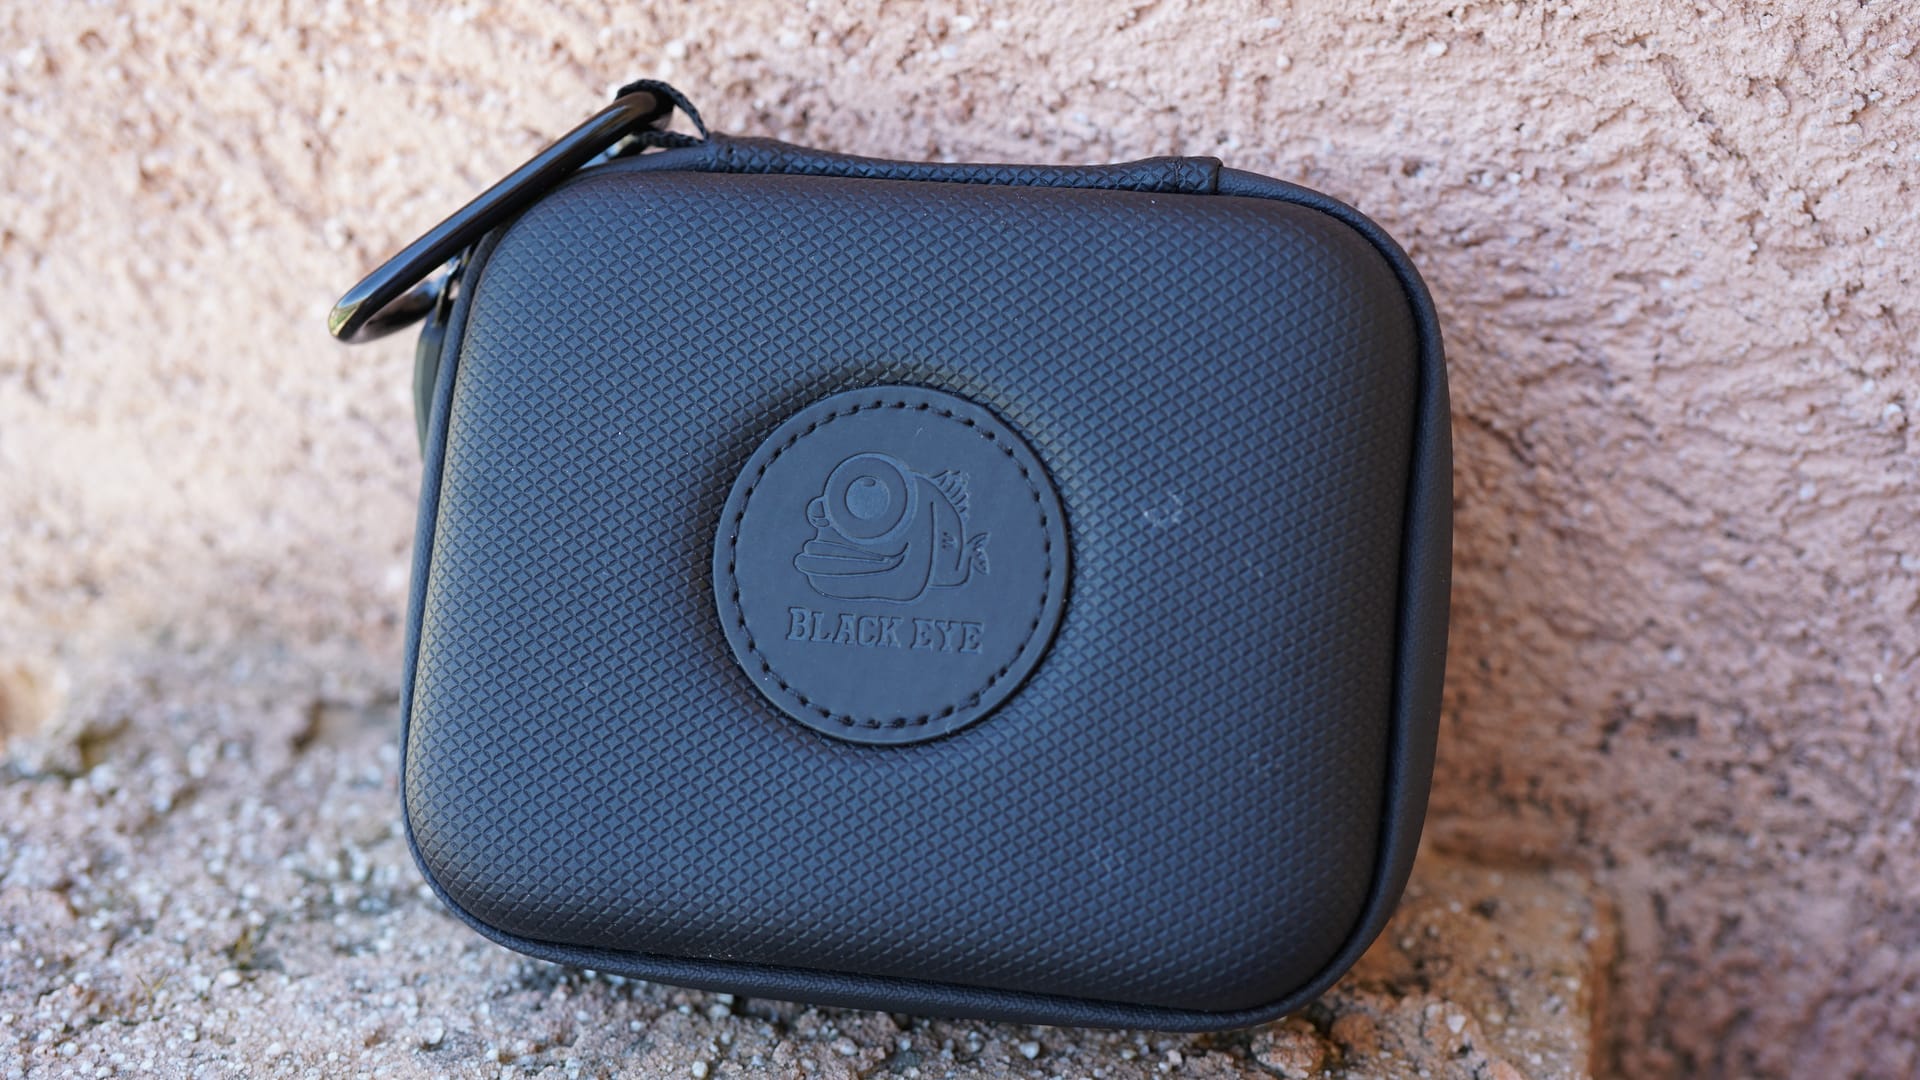 Black Eye Pro Kit G4 review carrying case side view